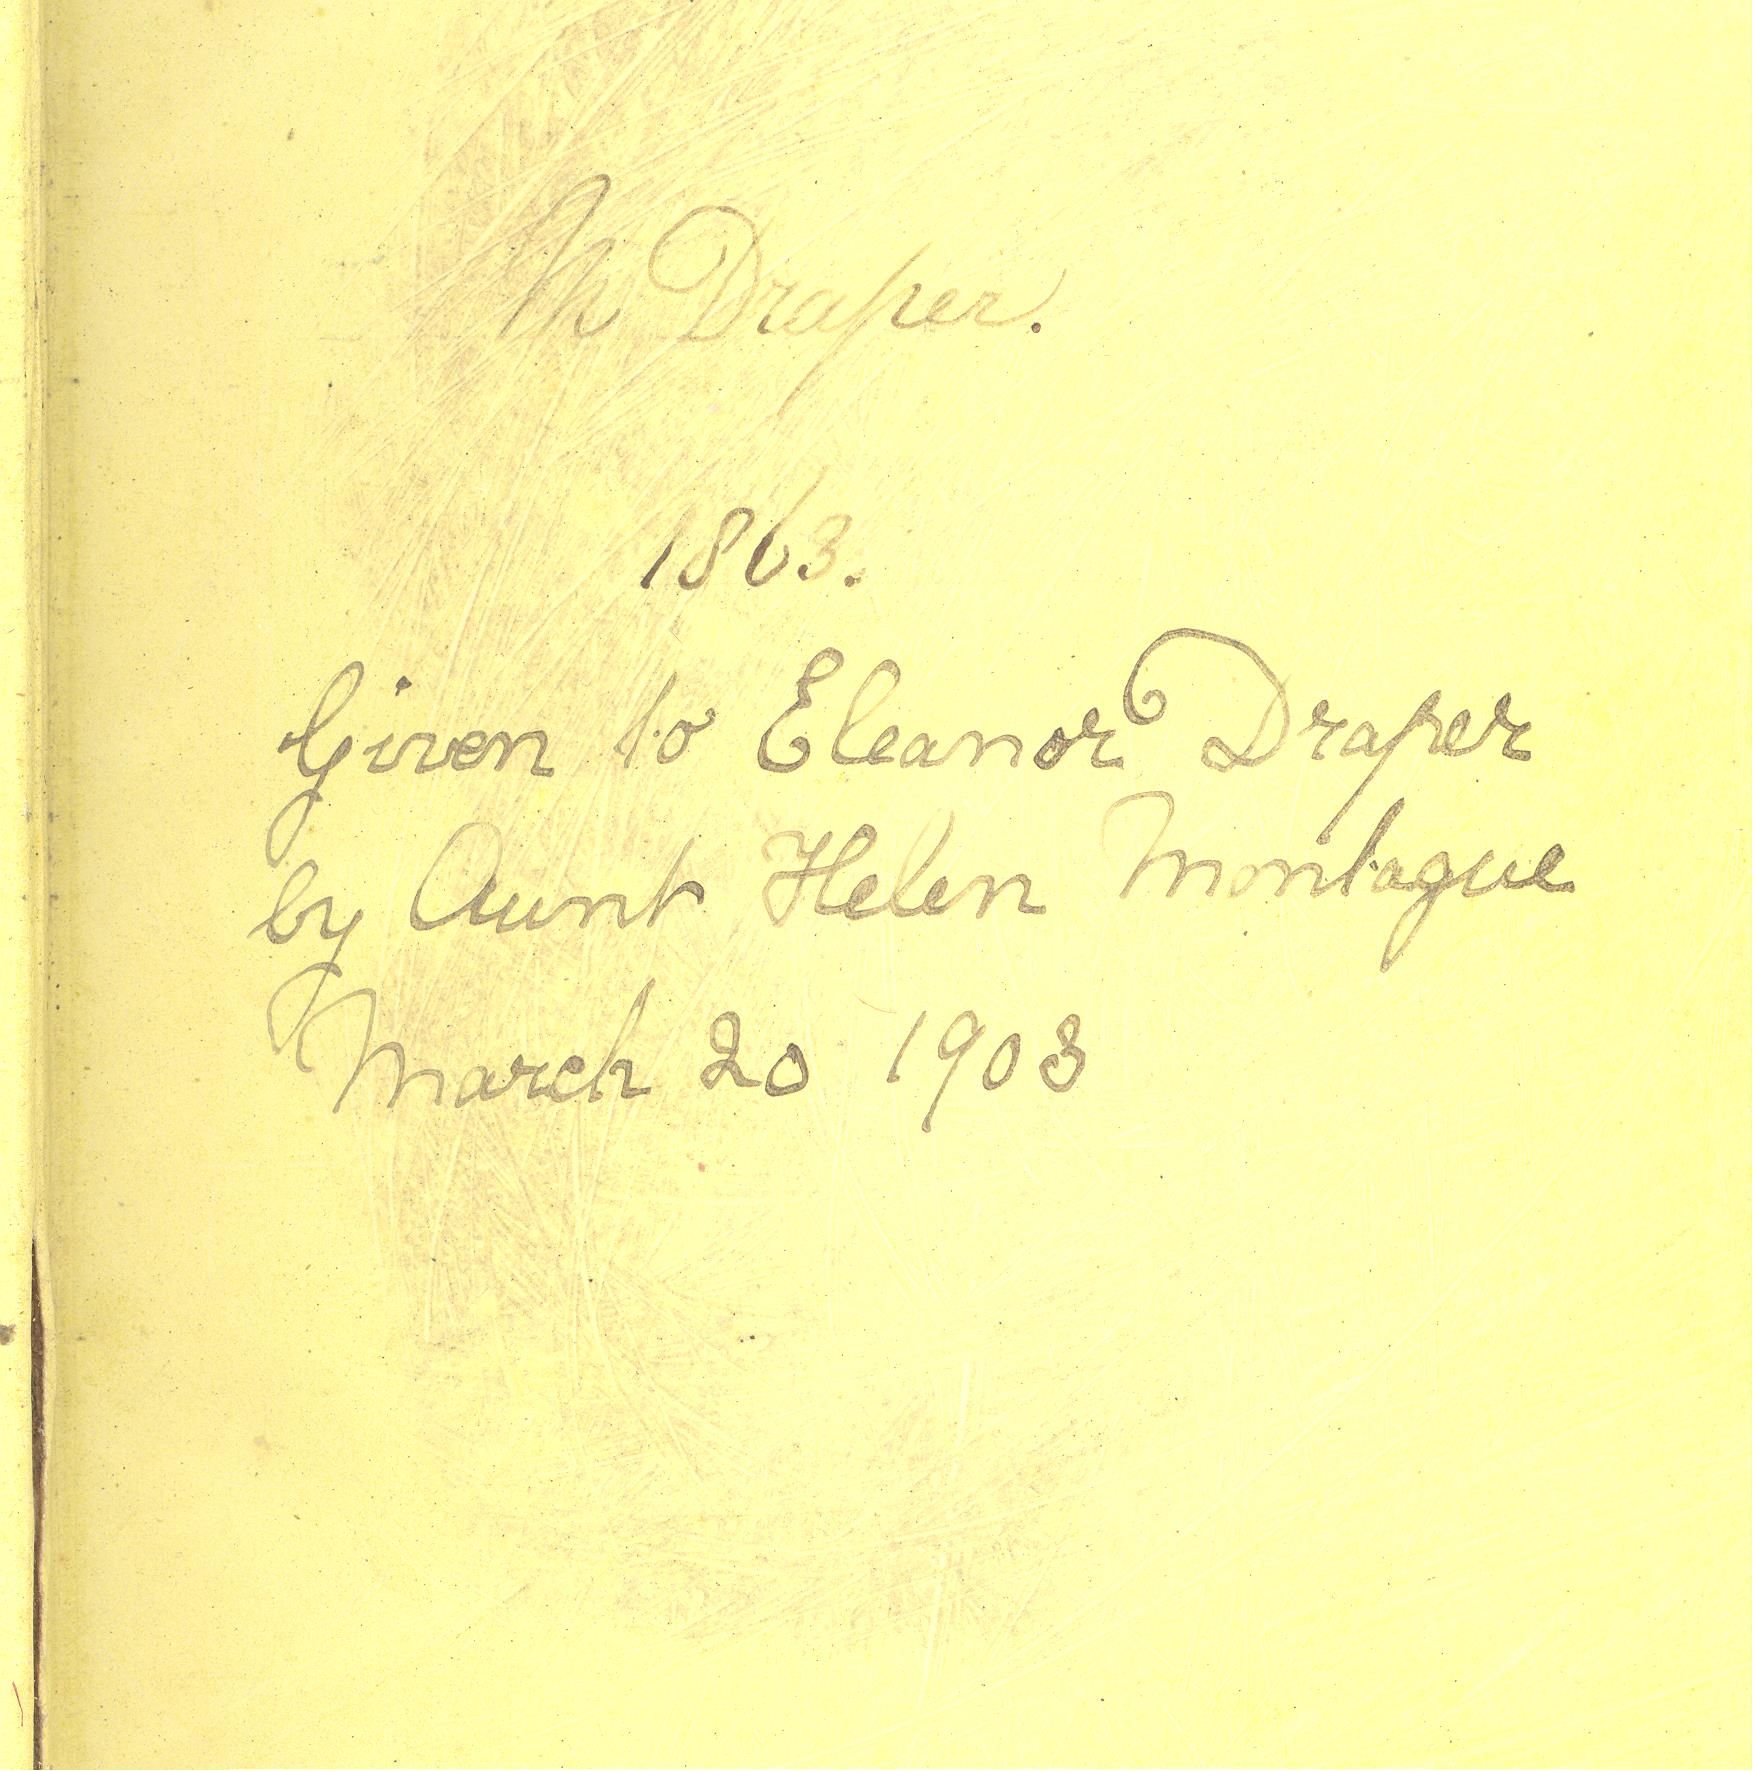 The inscription from Helen Montague to Eleanor Draper.